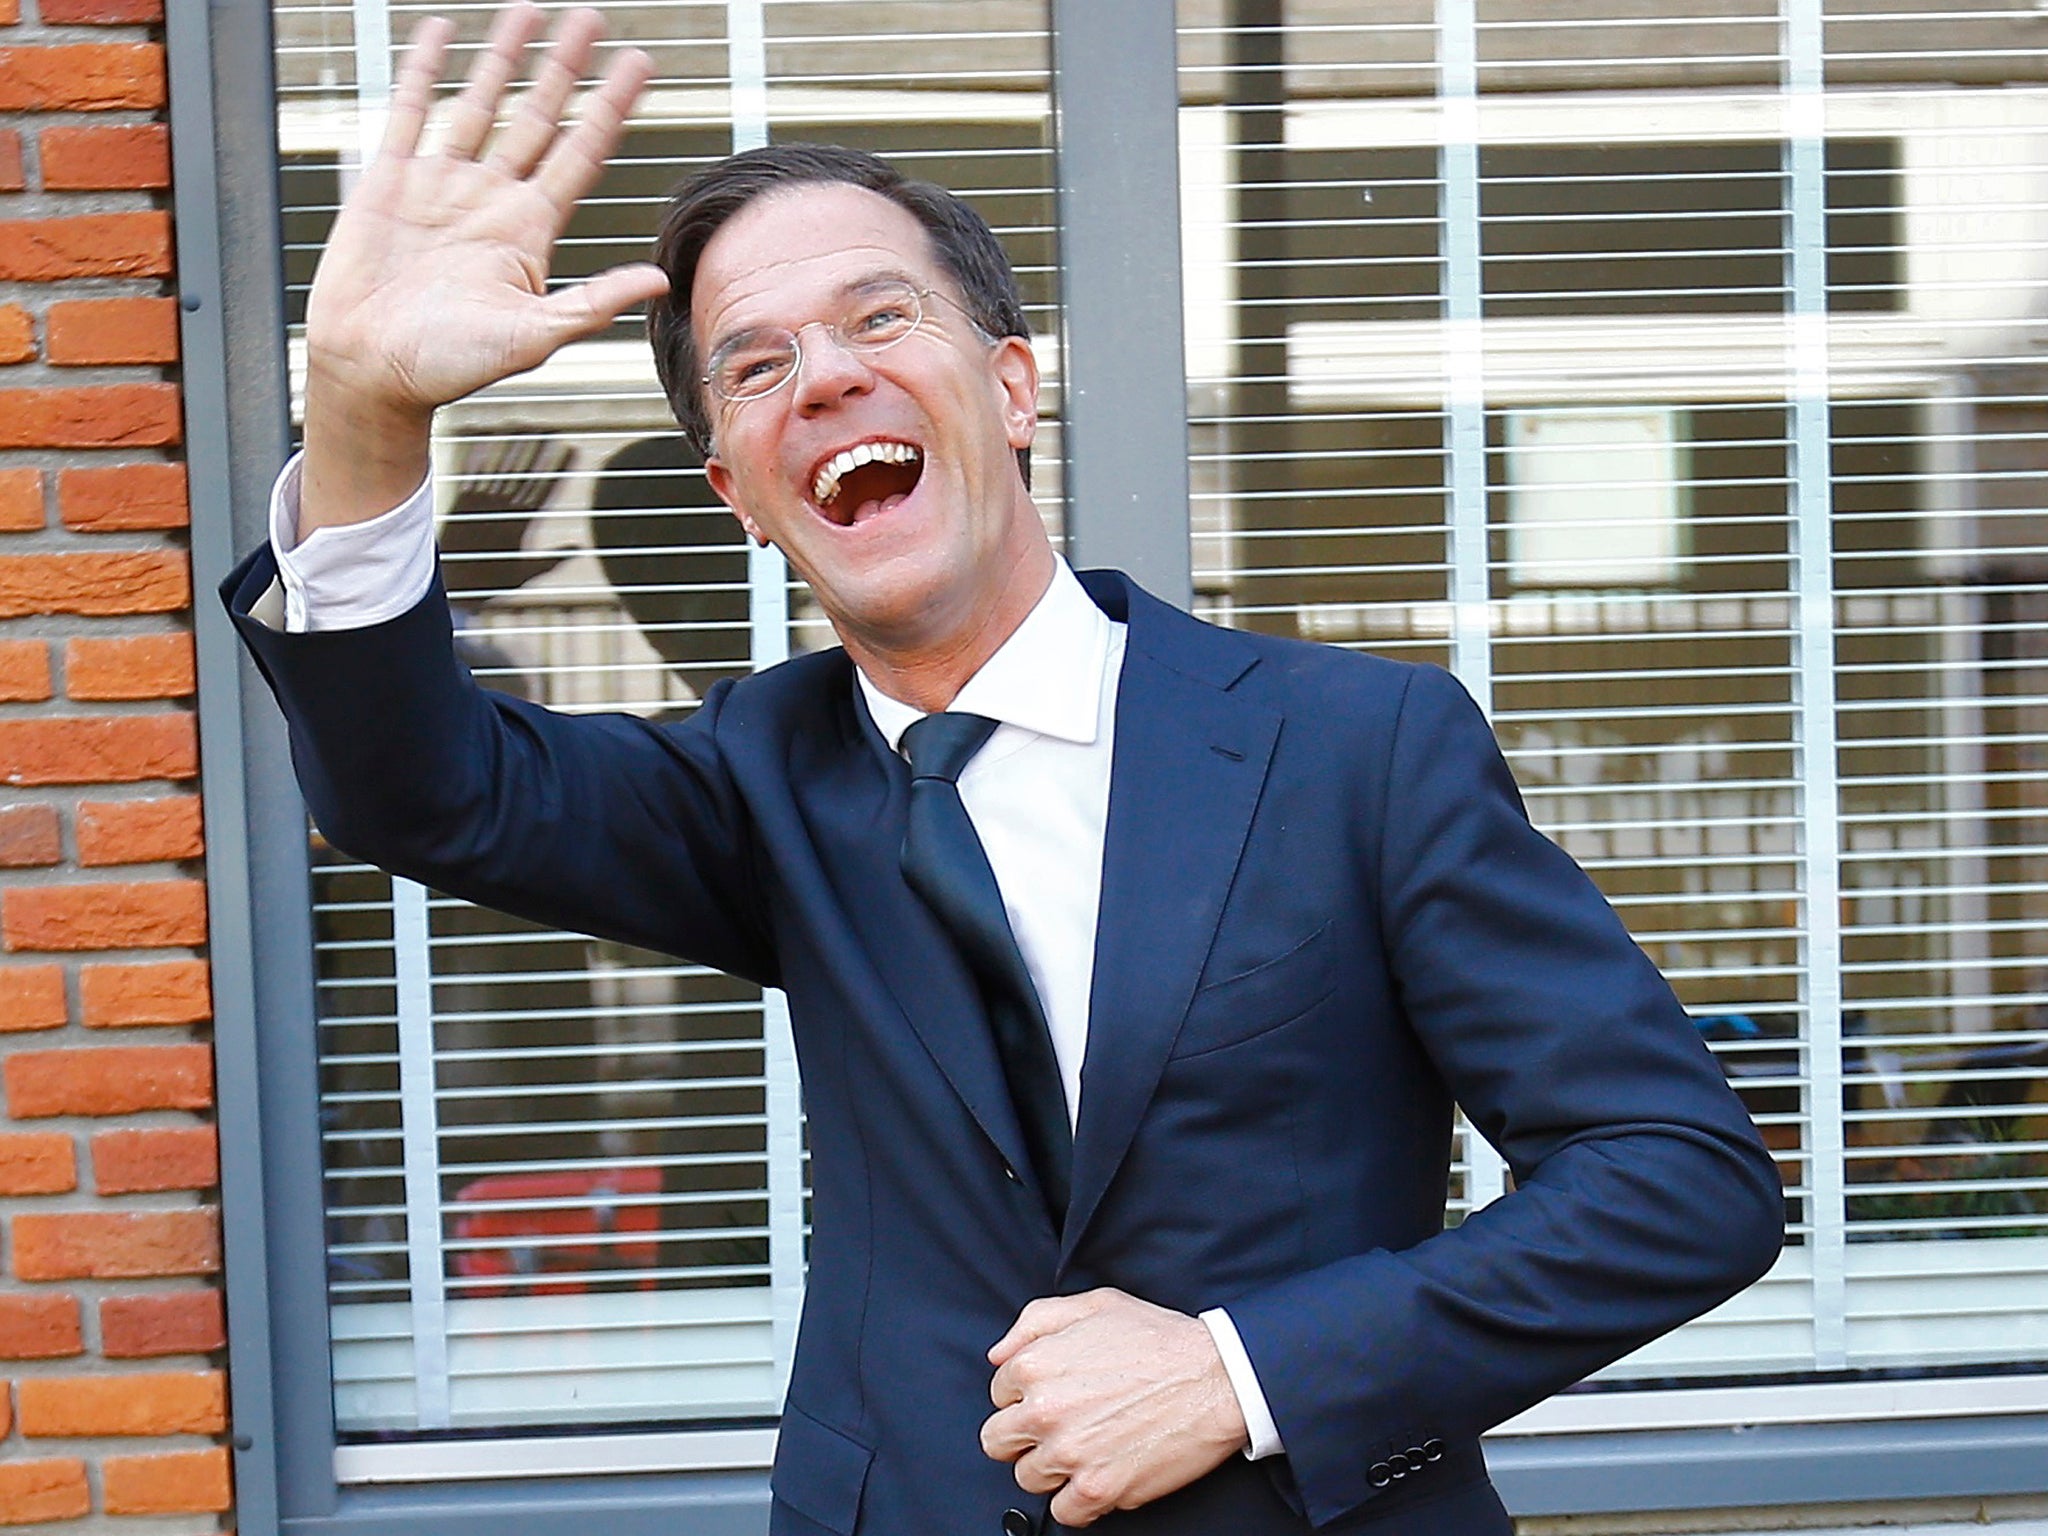 Dutch Prime Minister Mark Rutte of the VVD party waves after voting in the general election